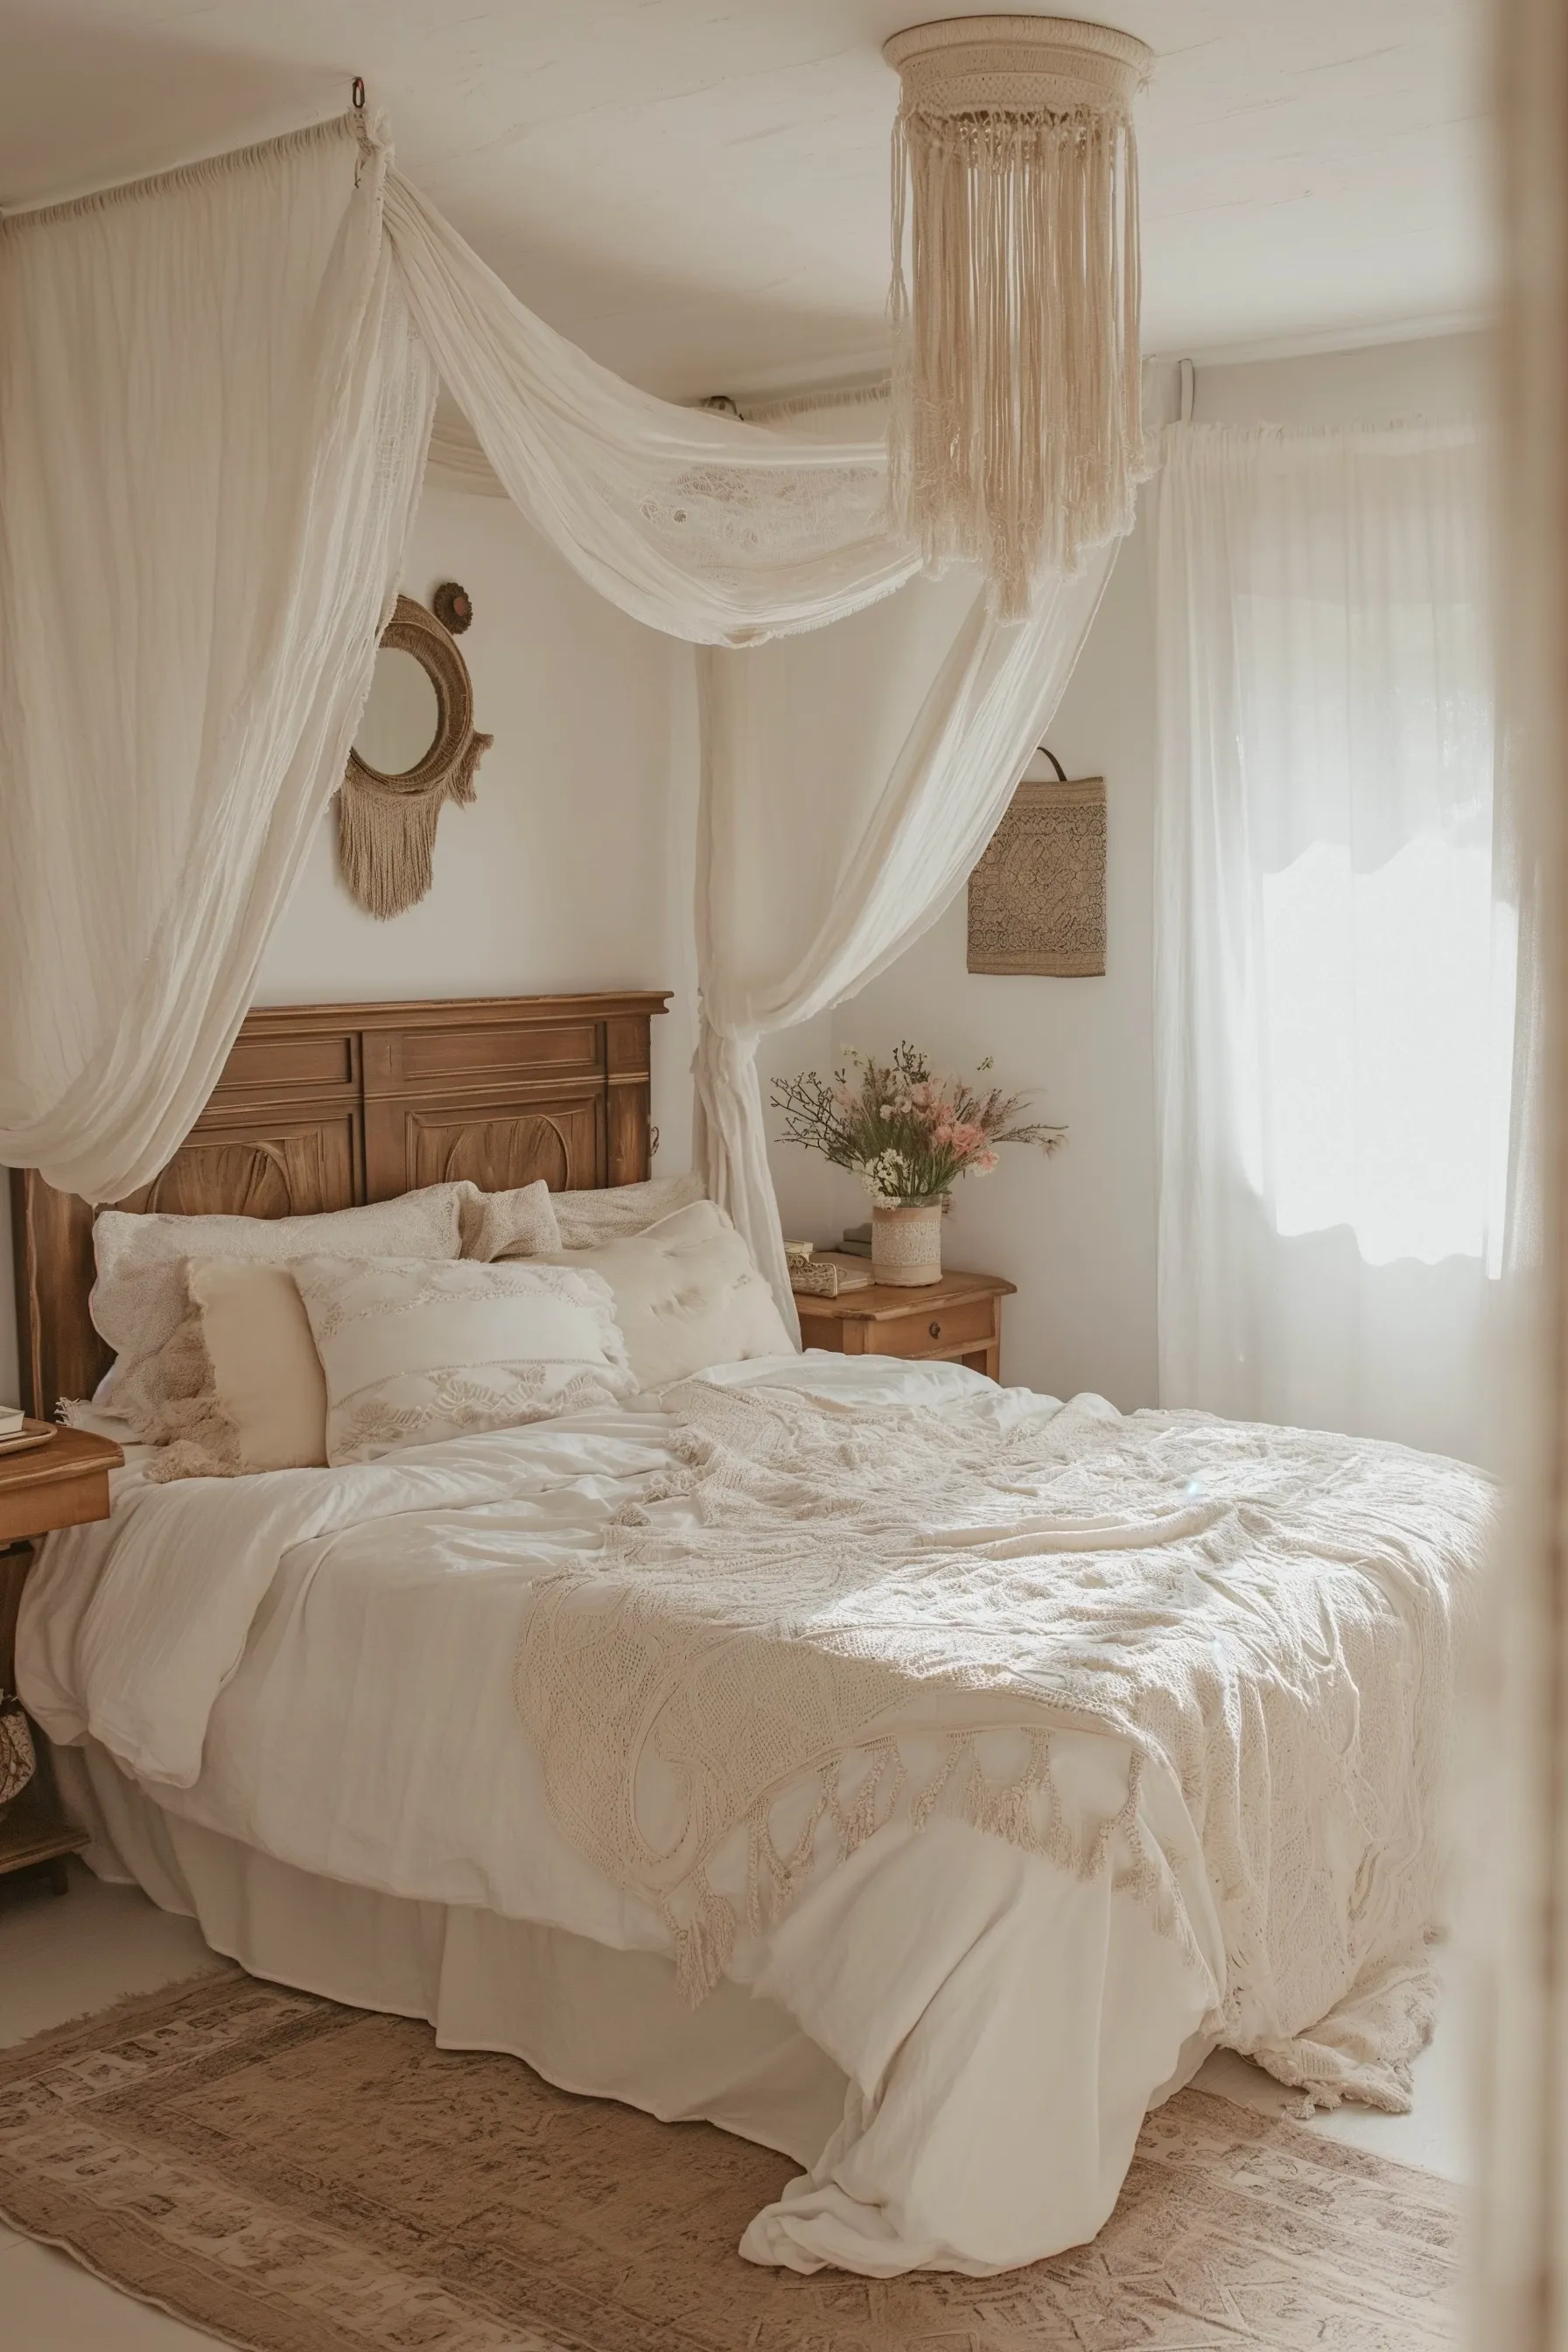 A white bedroom with a canopy and throw blankets